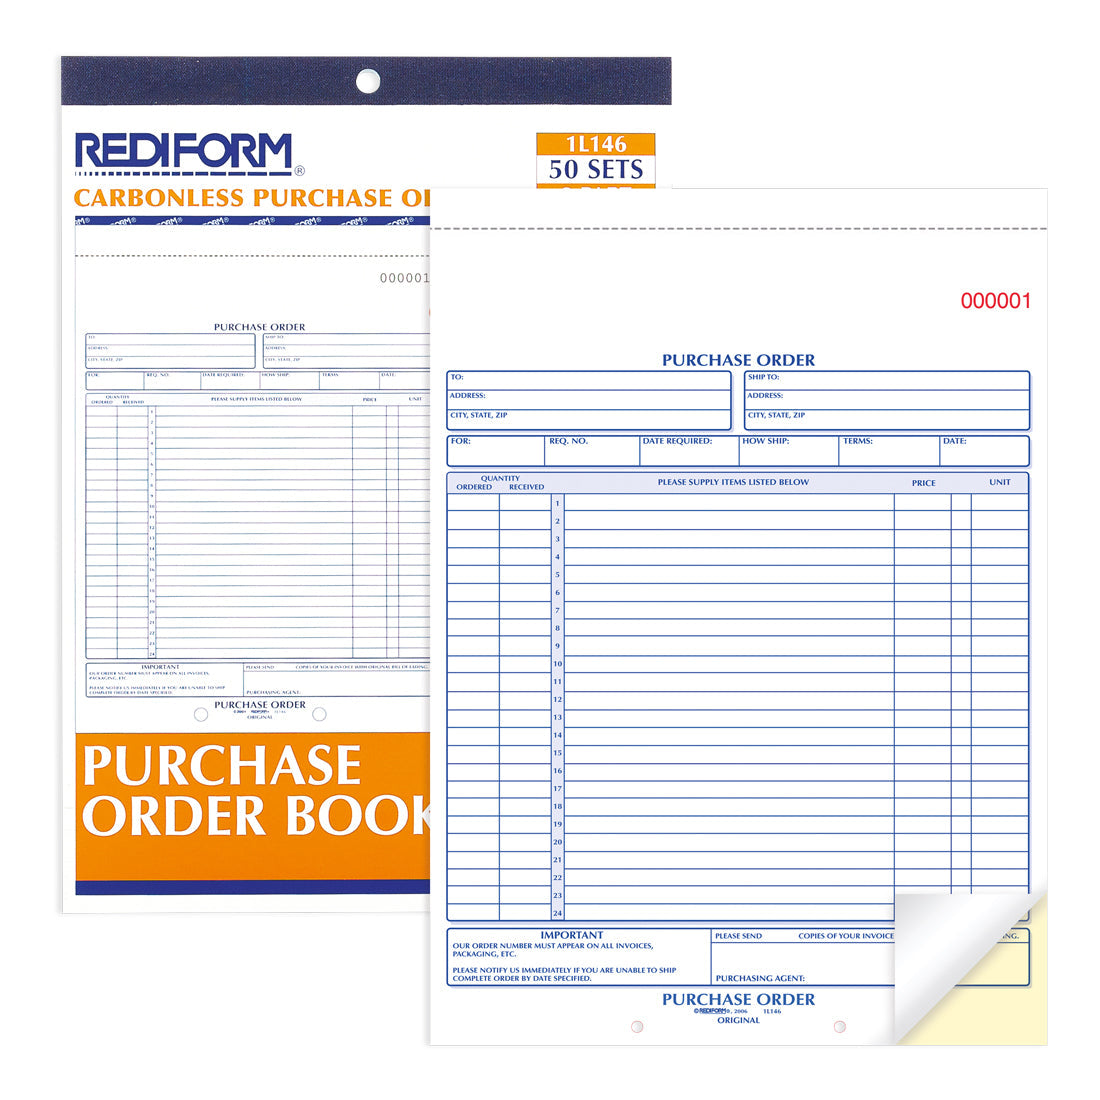 Purchase Order Book 1L146